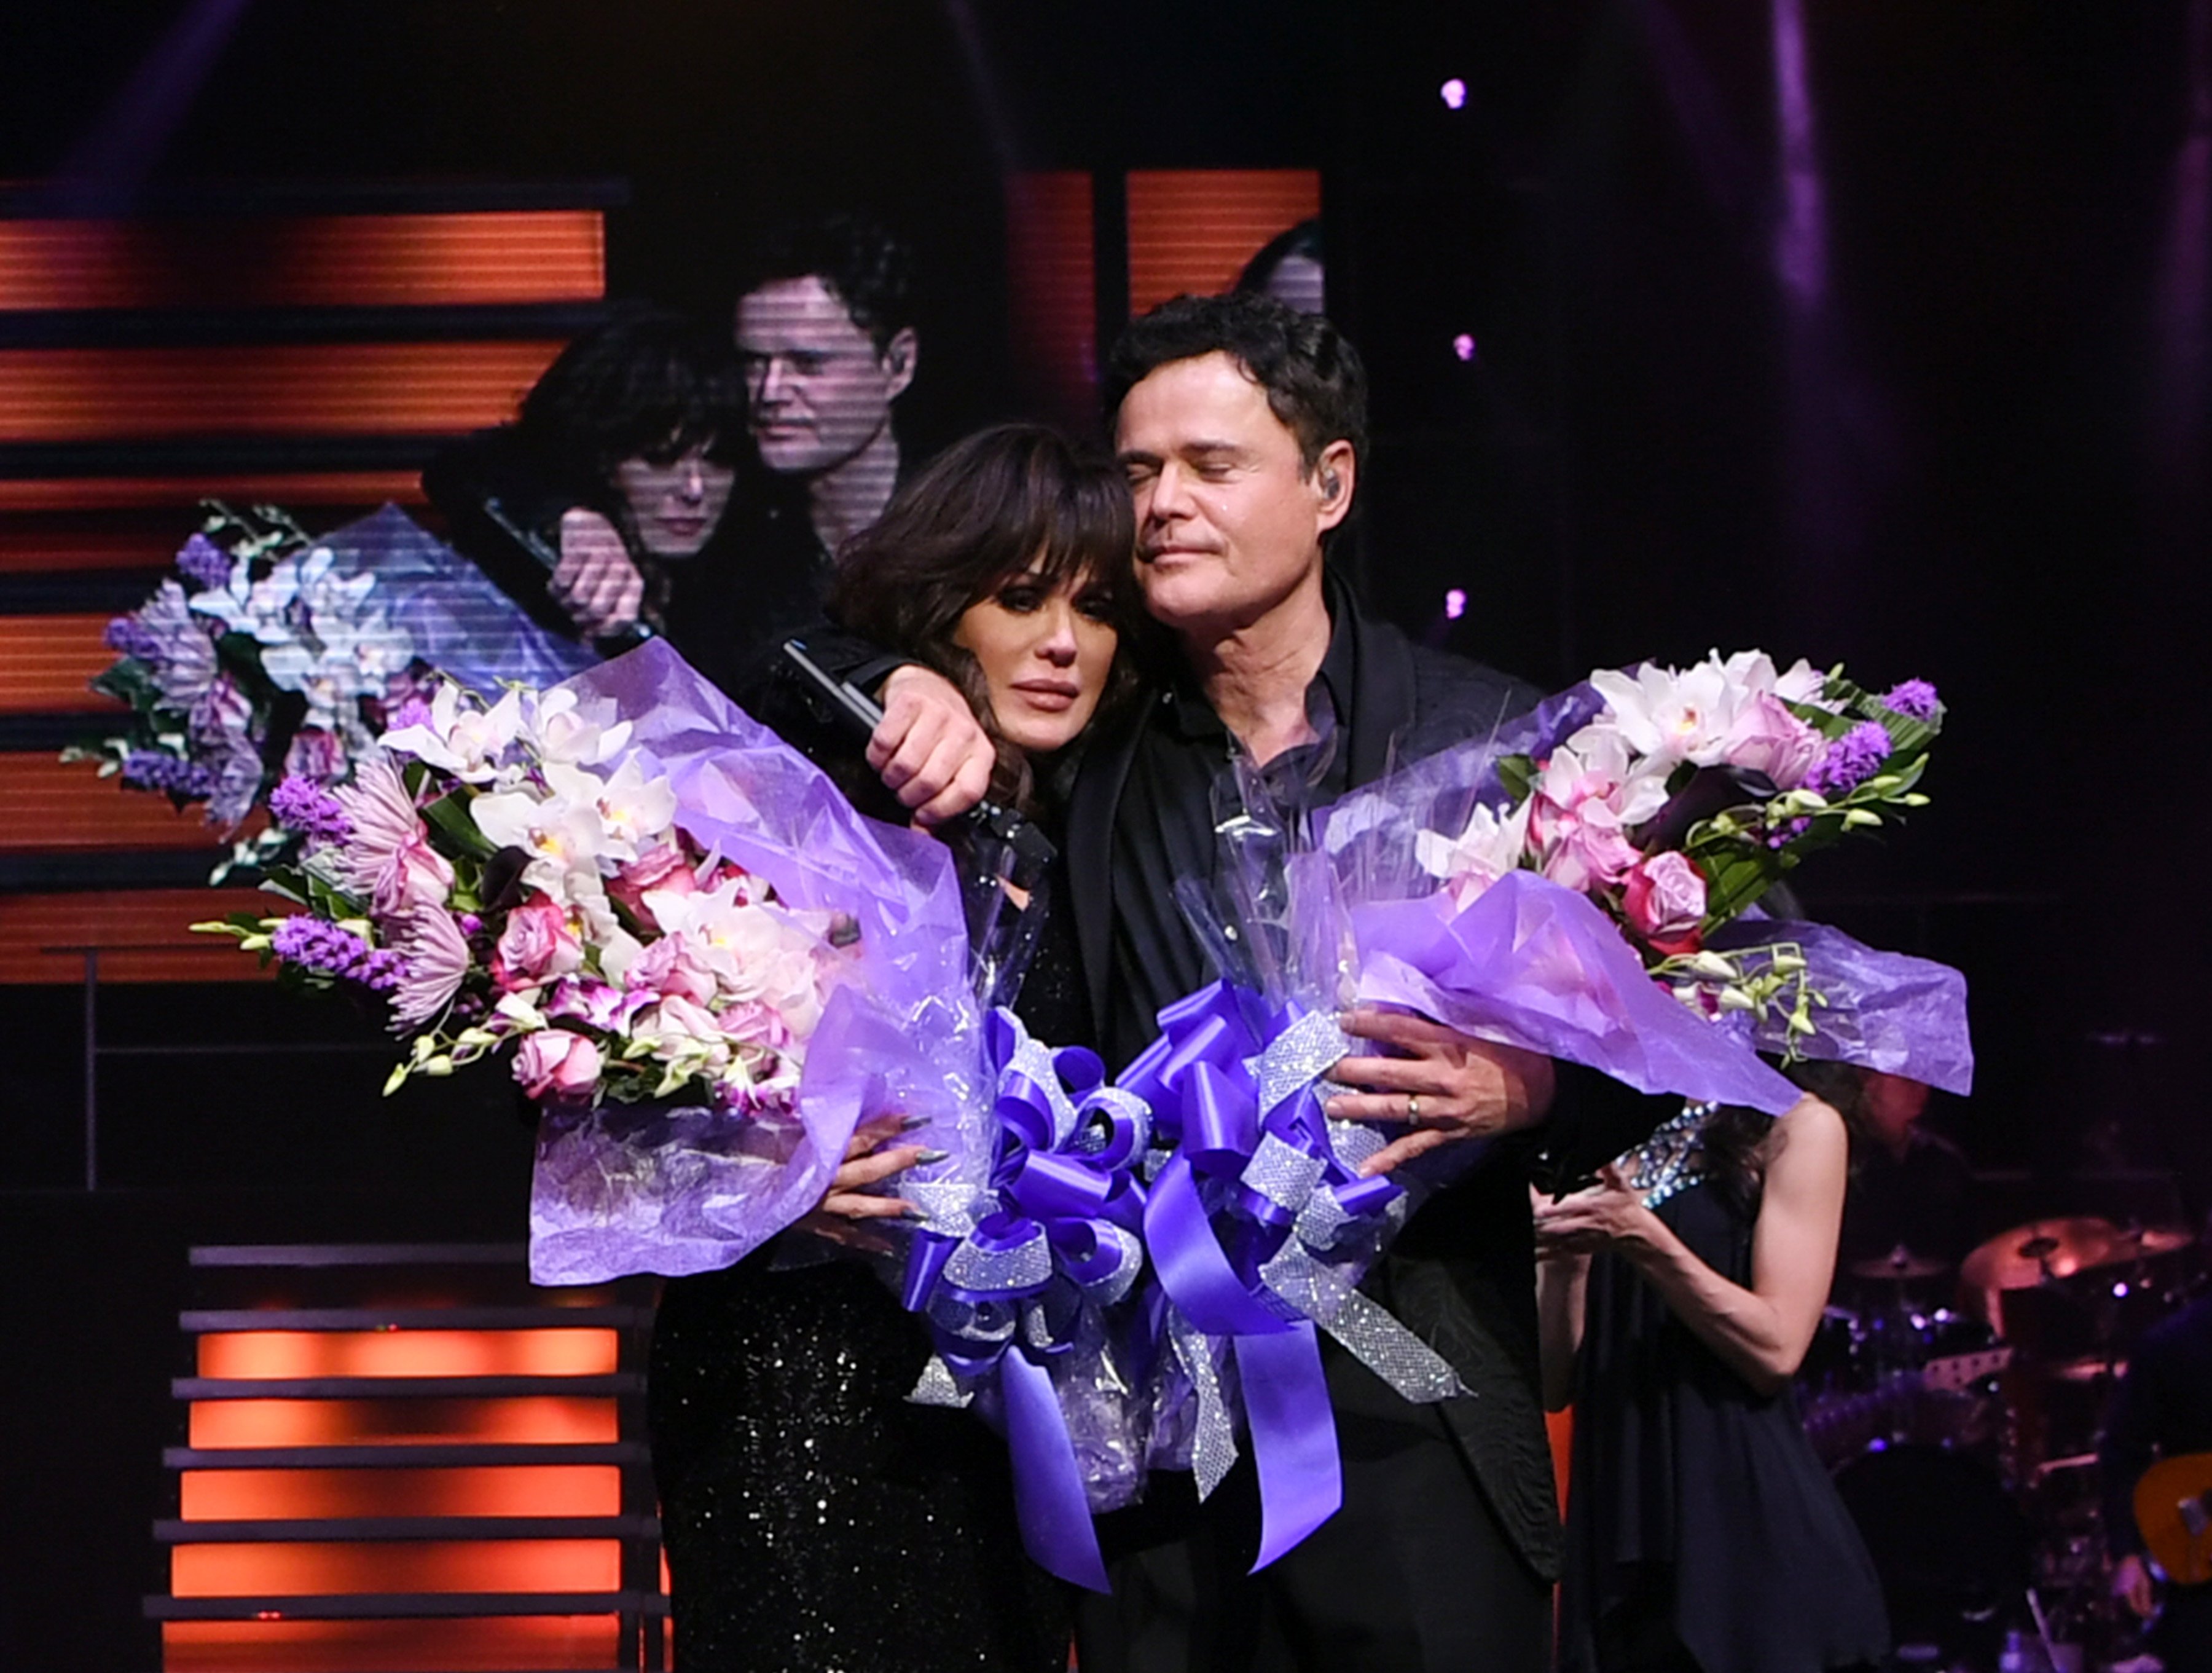 Donny & Marie Osmond on November 16, 2019 in Las Vegas, Nevada. | Source: Getty Images